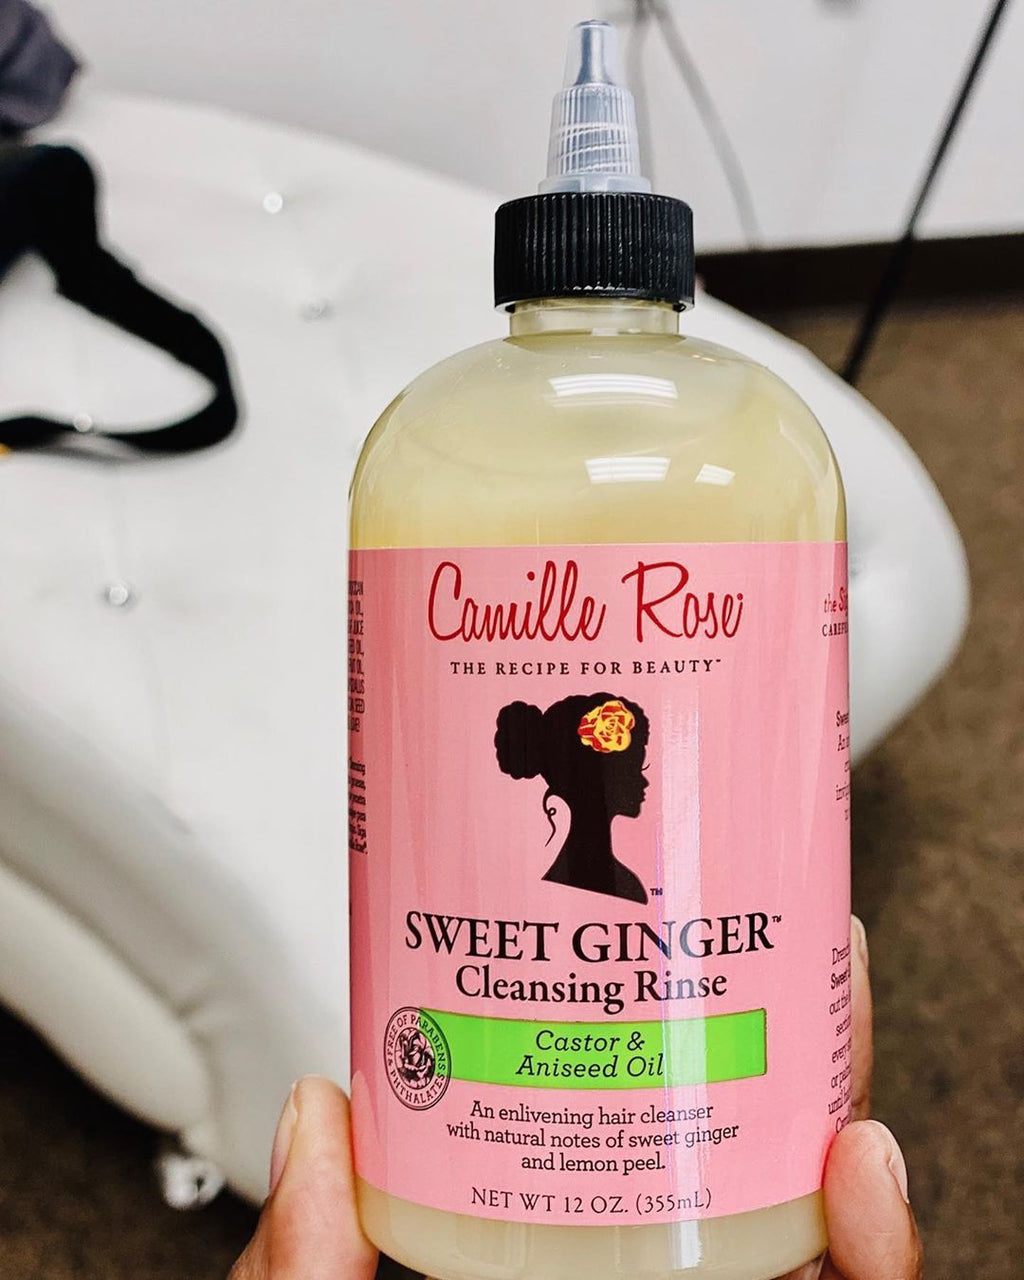 CAMILLE ROSE Sweet Ginger Cleansing Rinse